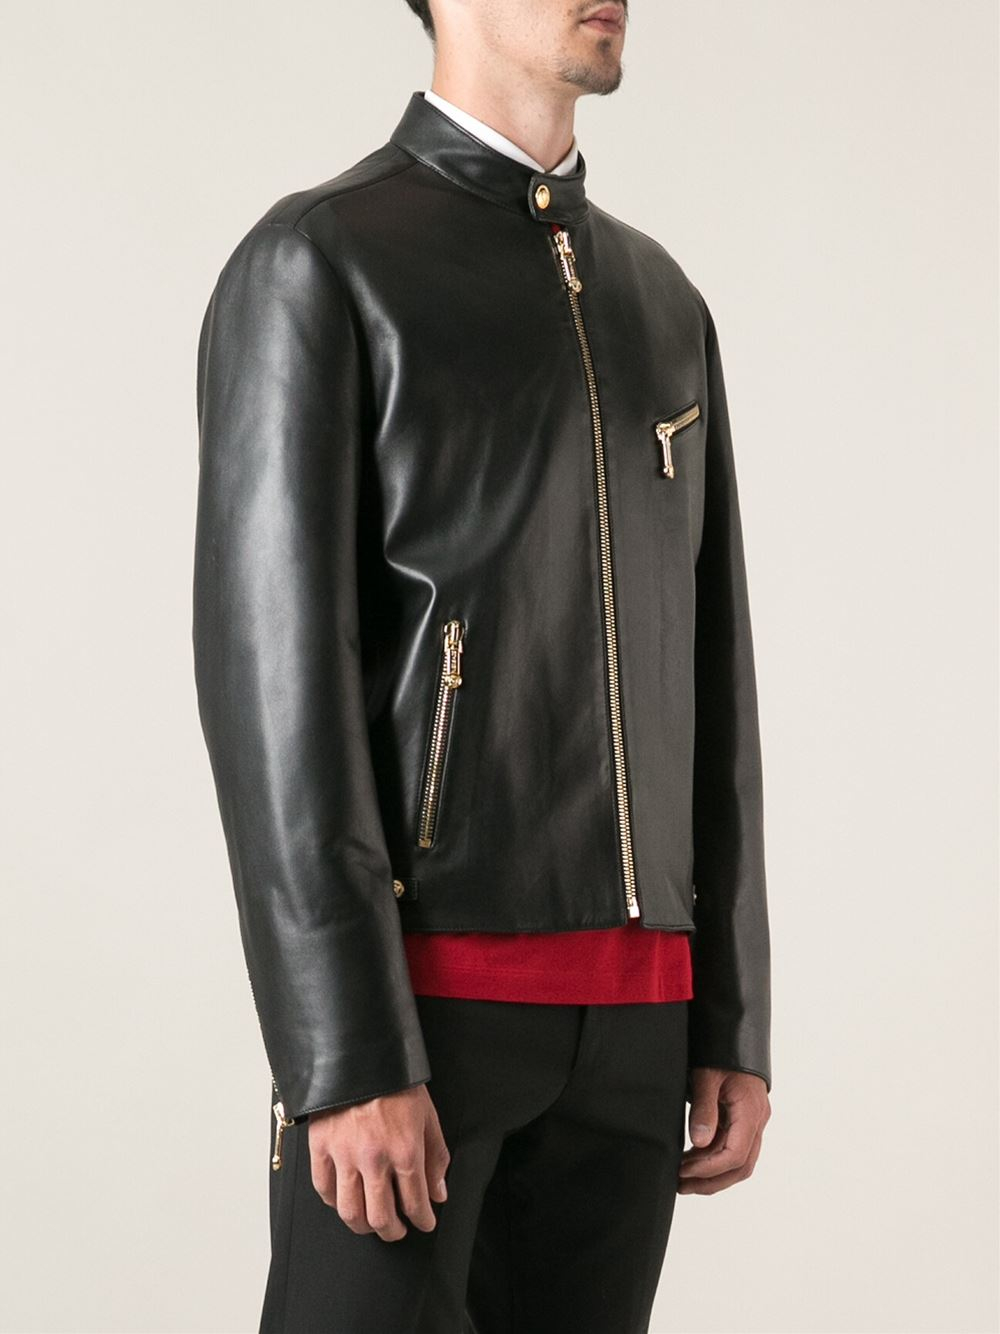 Lyst - Versace Classic Leather Jacket in Black for Men